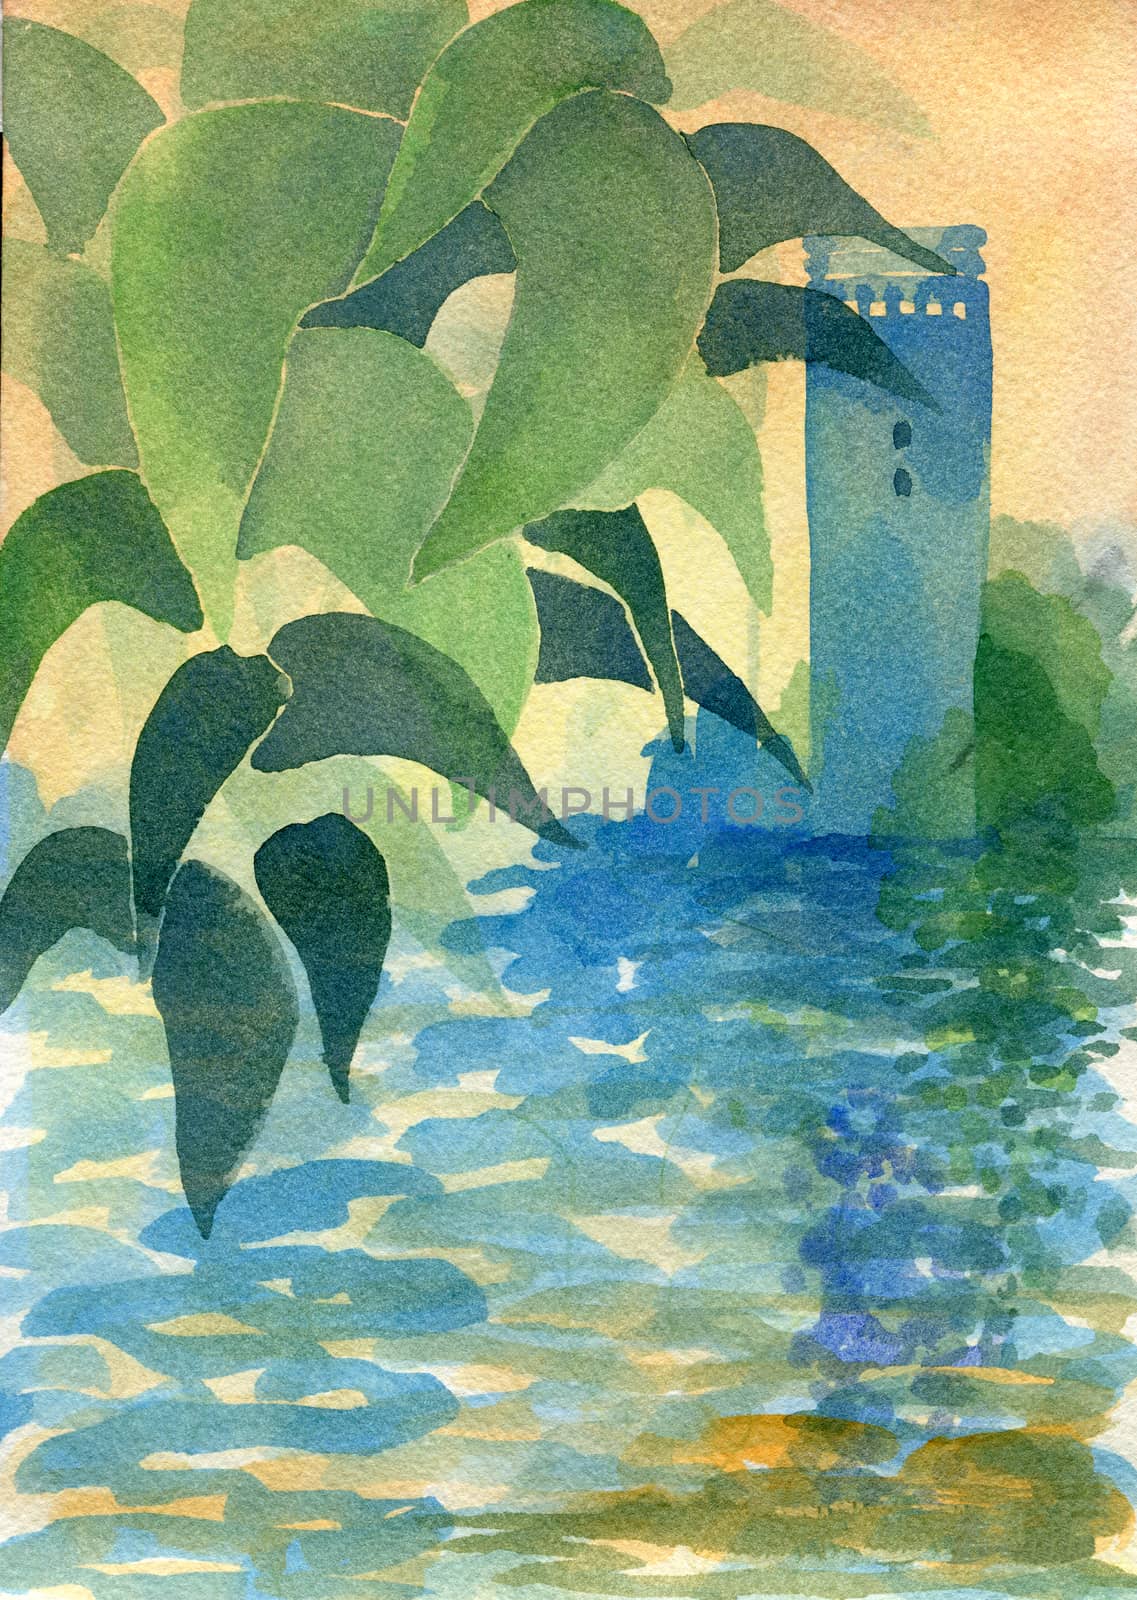 Leaves and water. Original watercolor painting with texture.